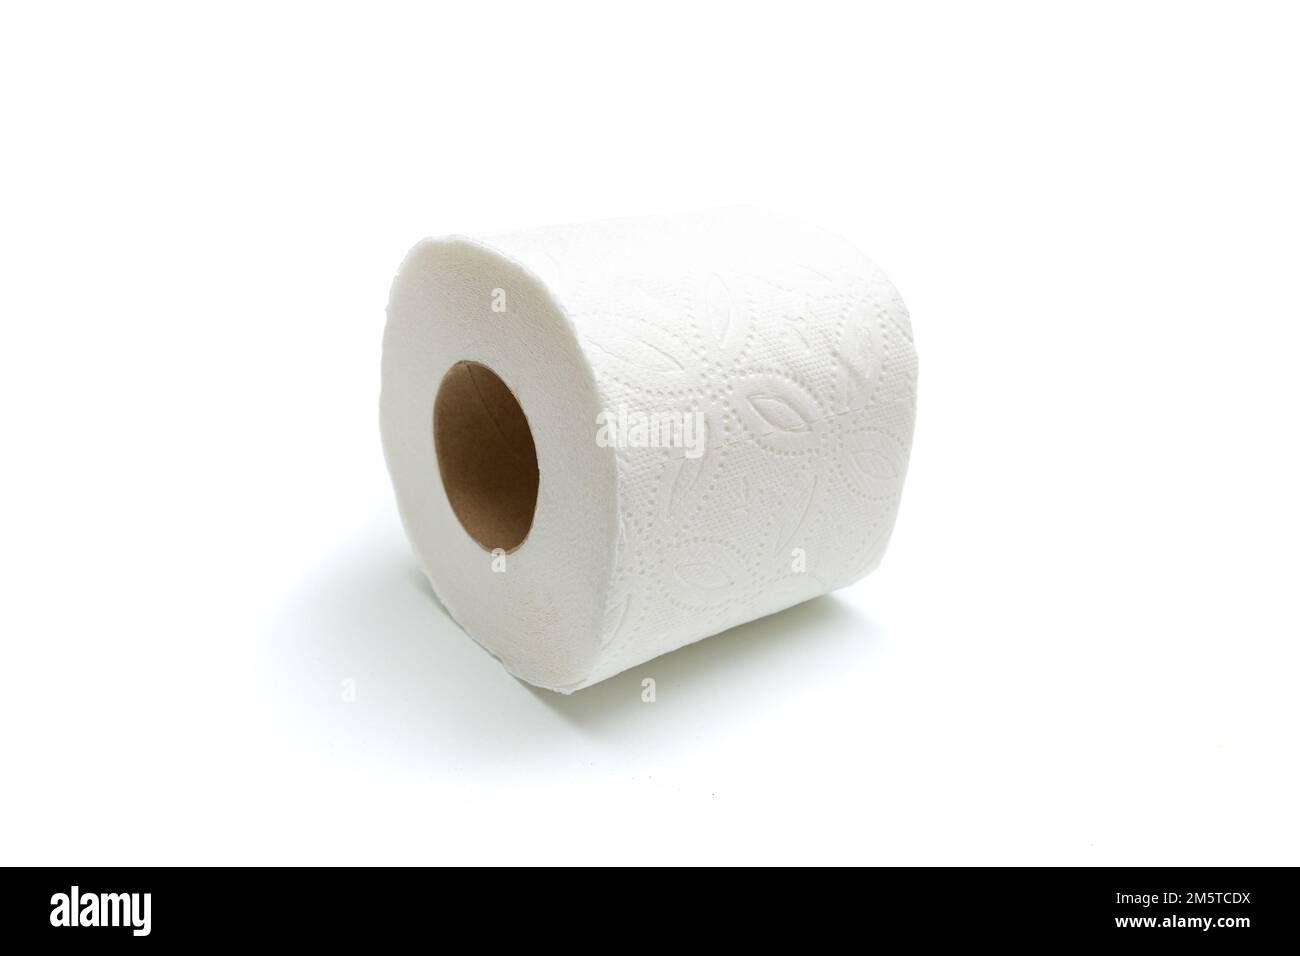 Single toilet paper roll isolated on white background Stock Photo